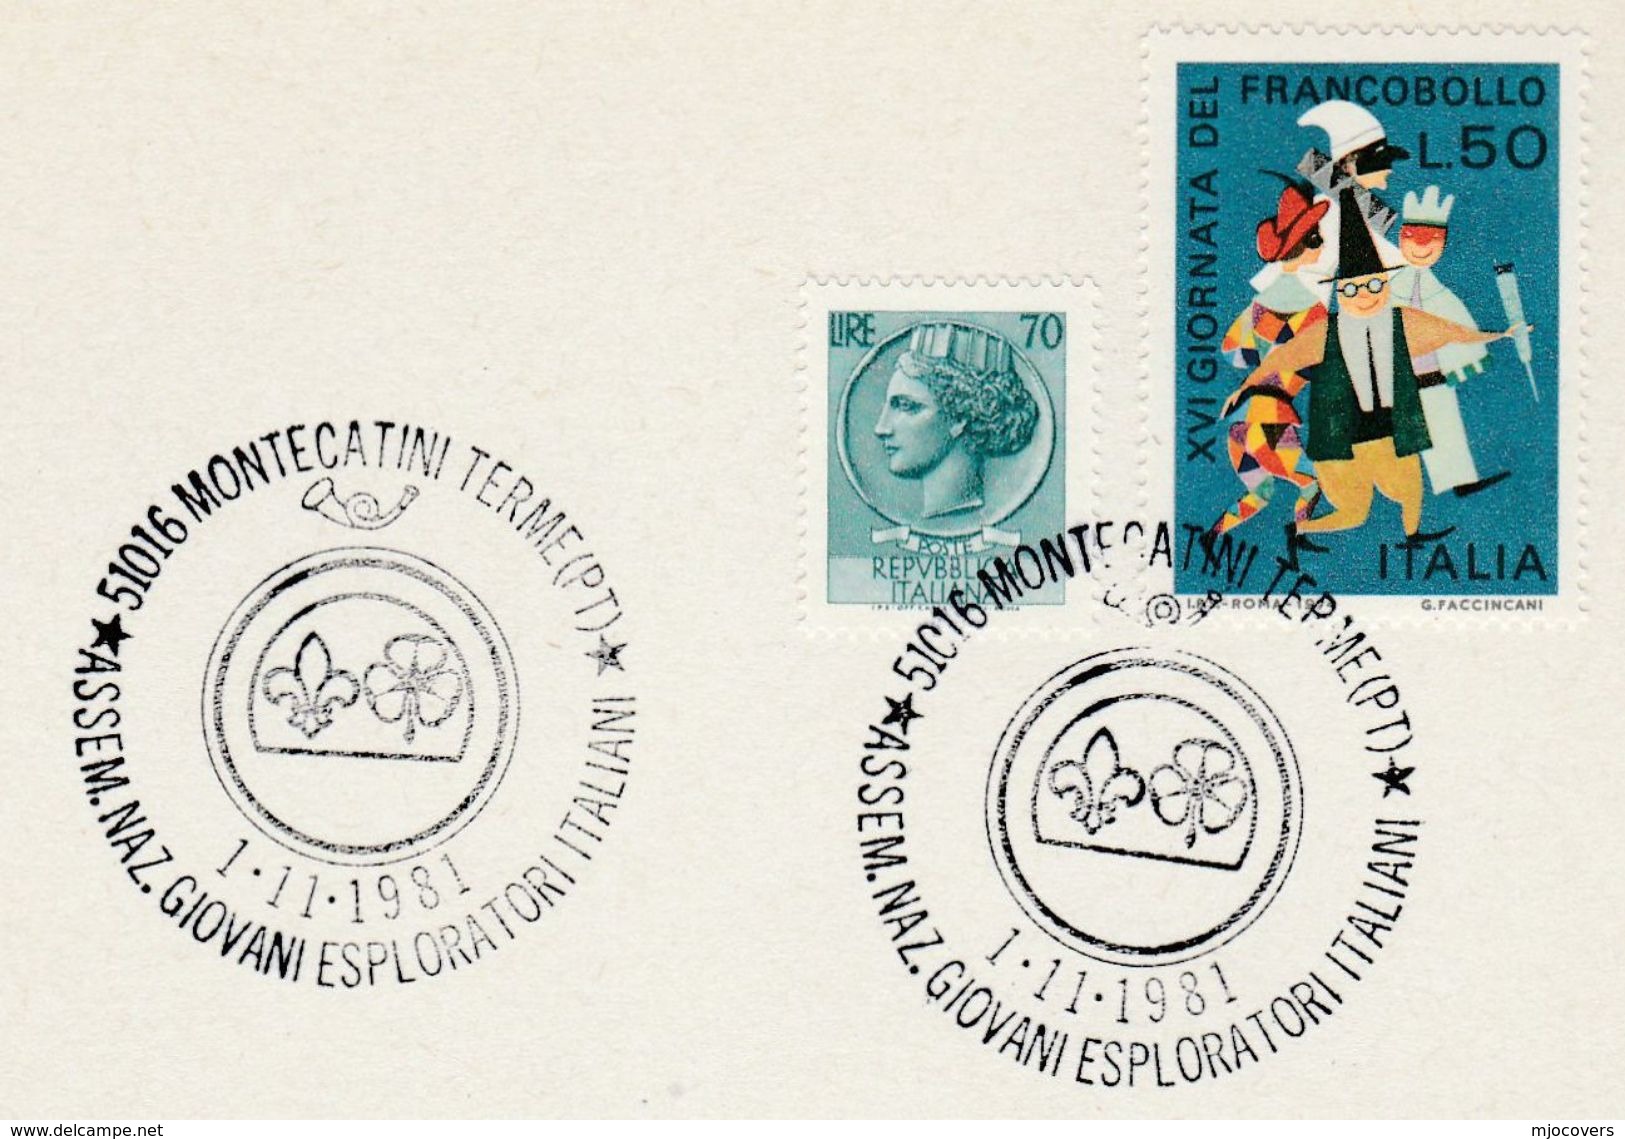 1981 MONTECATINI Terme SCOUTS EVENT COVER Card Italy Scouting Stamps - Covers & Documents